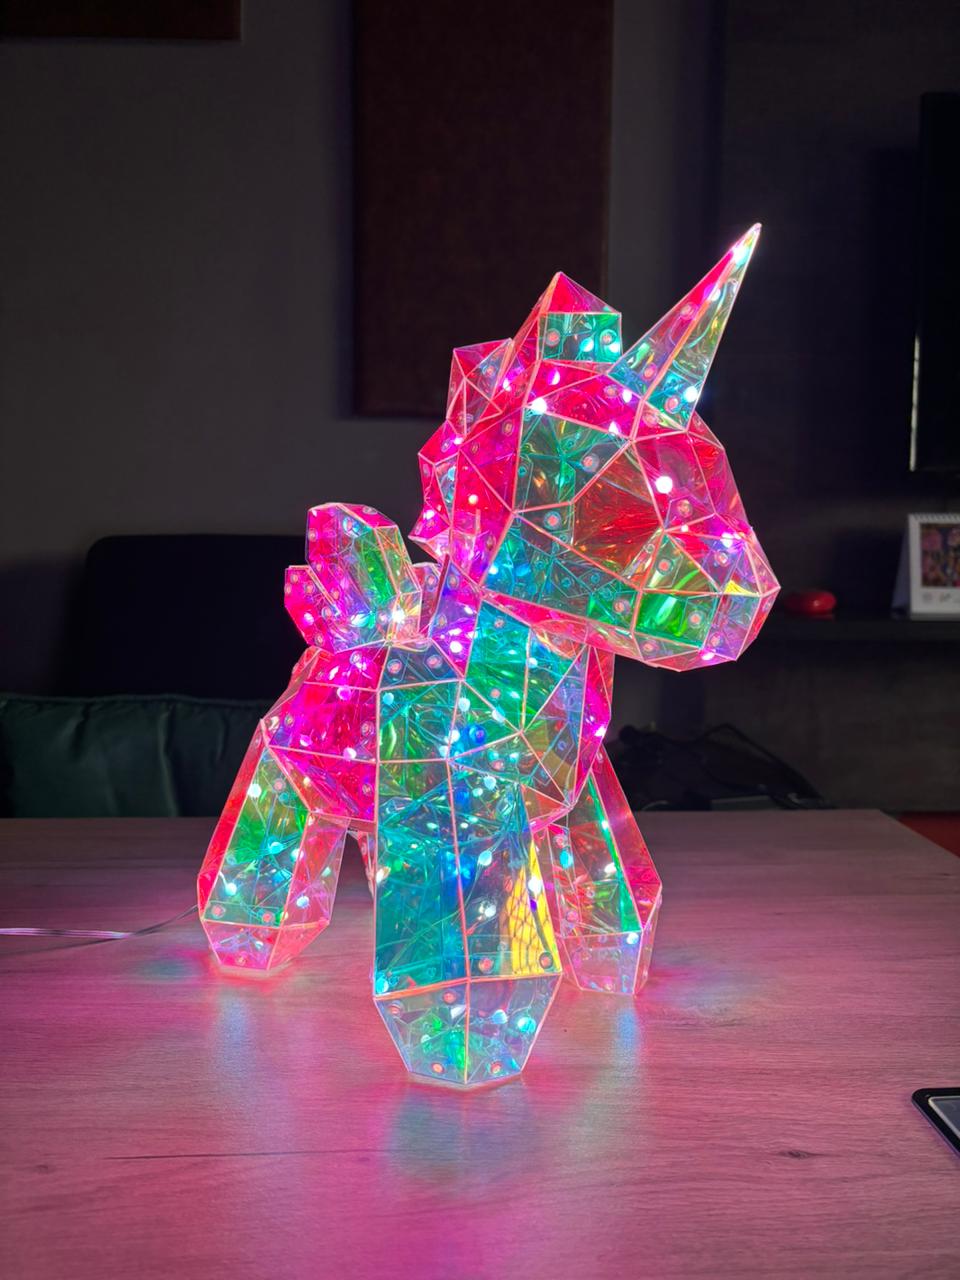 Emerge Unicorn, PVC LED Holographic Light in Gift Box for Valentine's Day Romantic Night Light